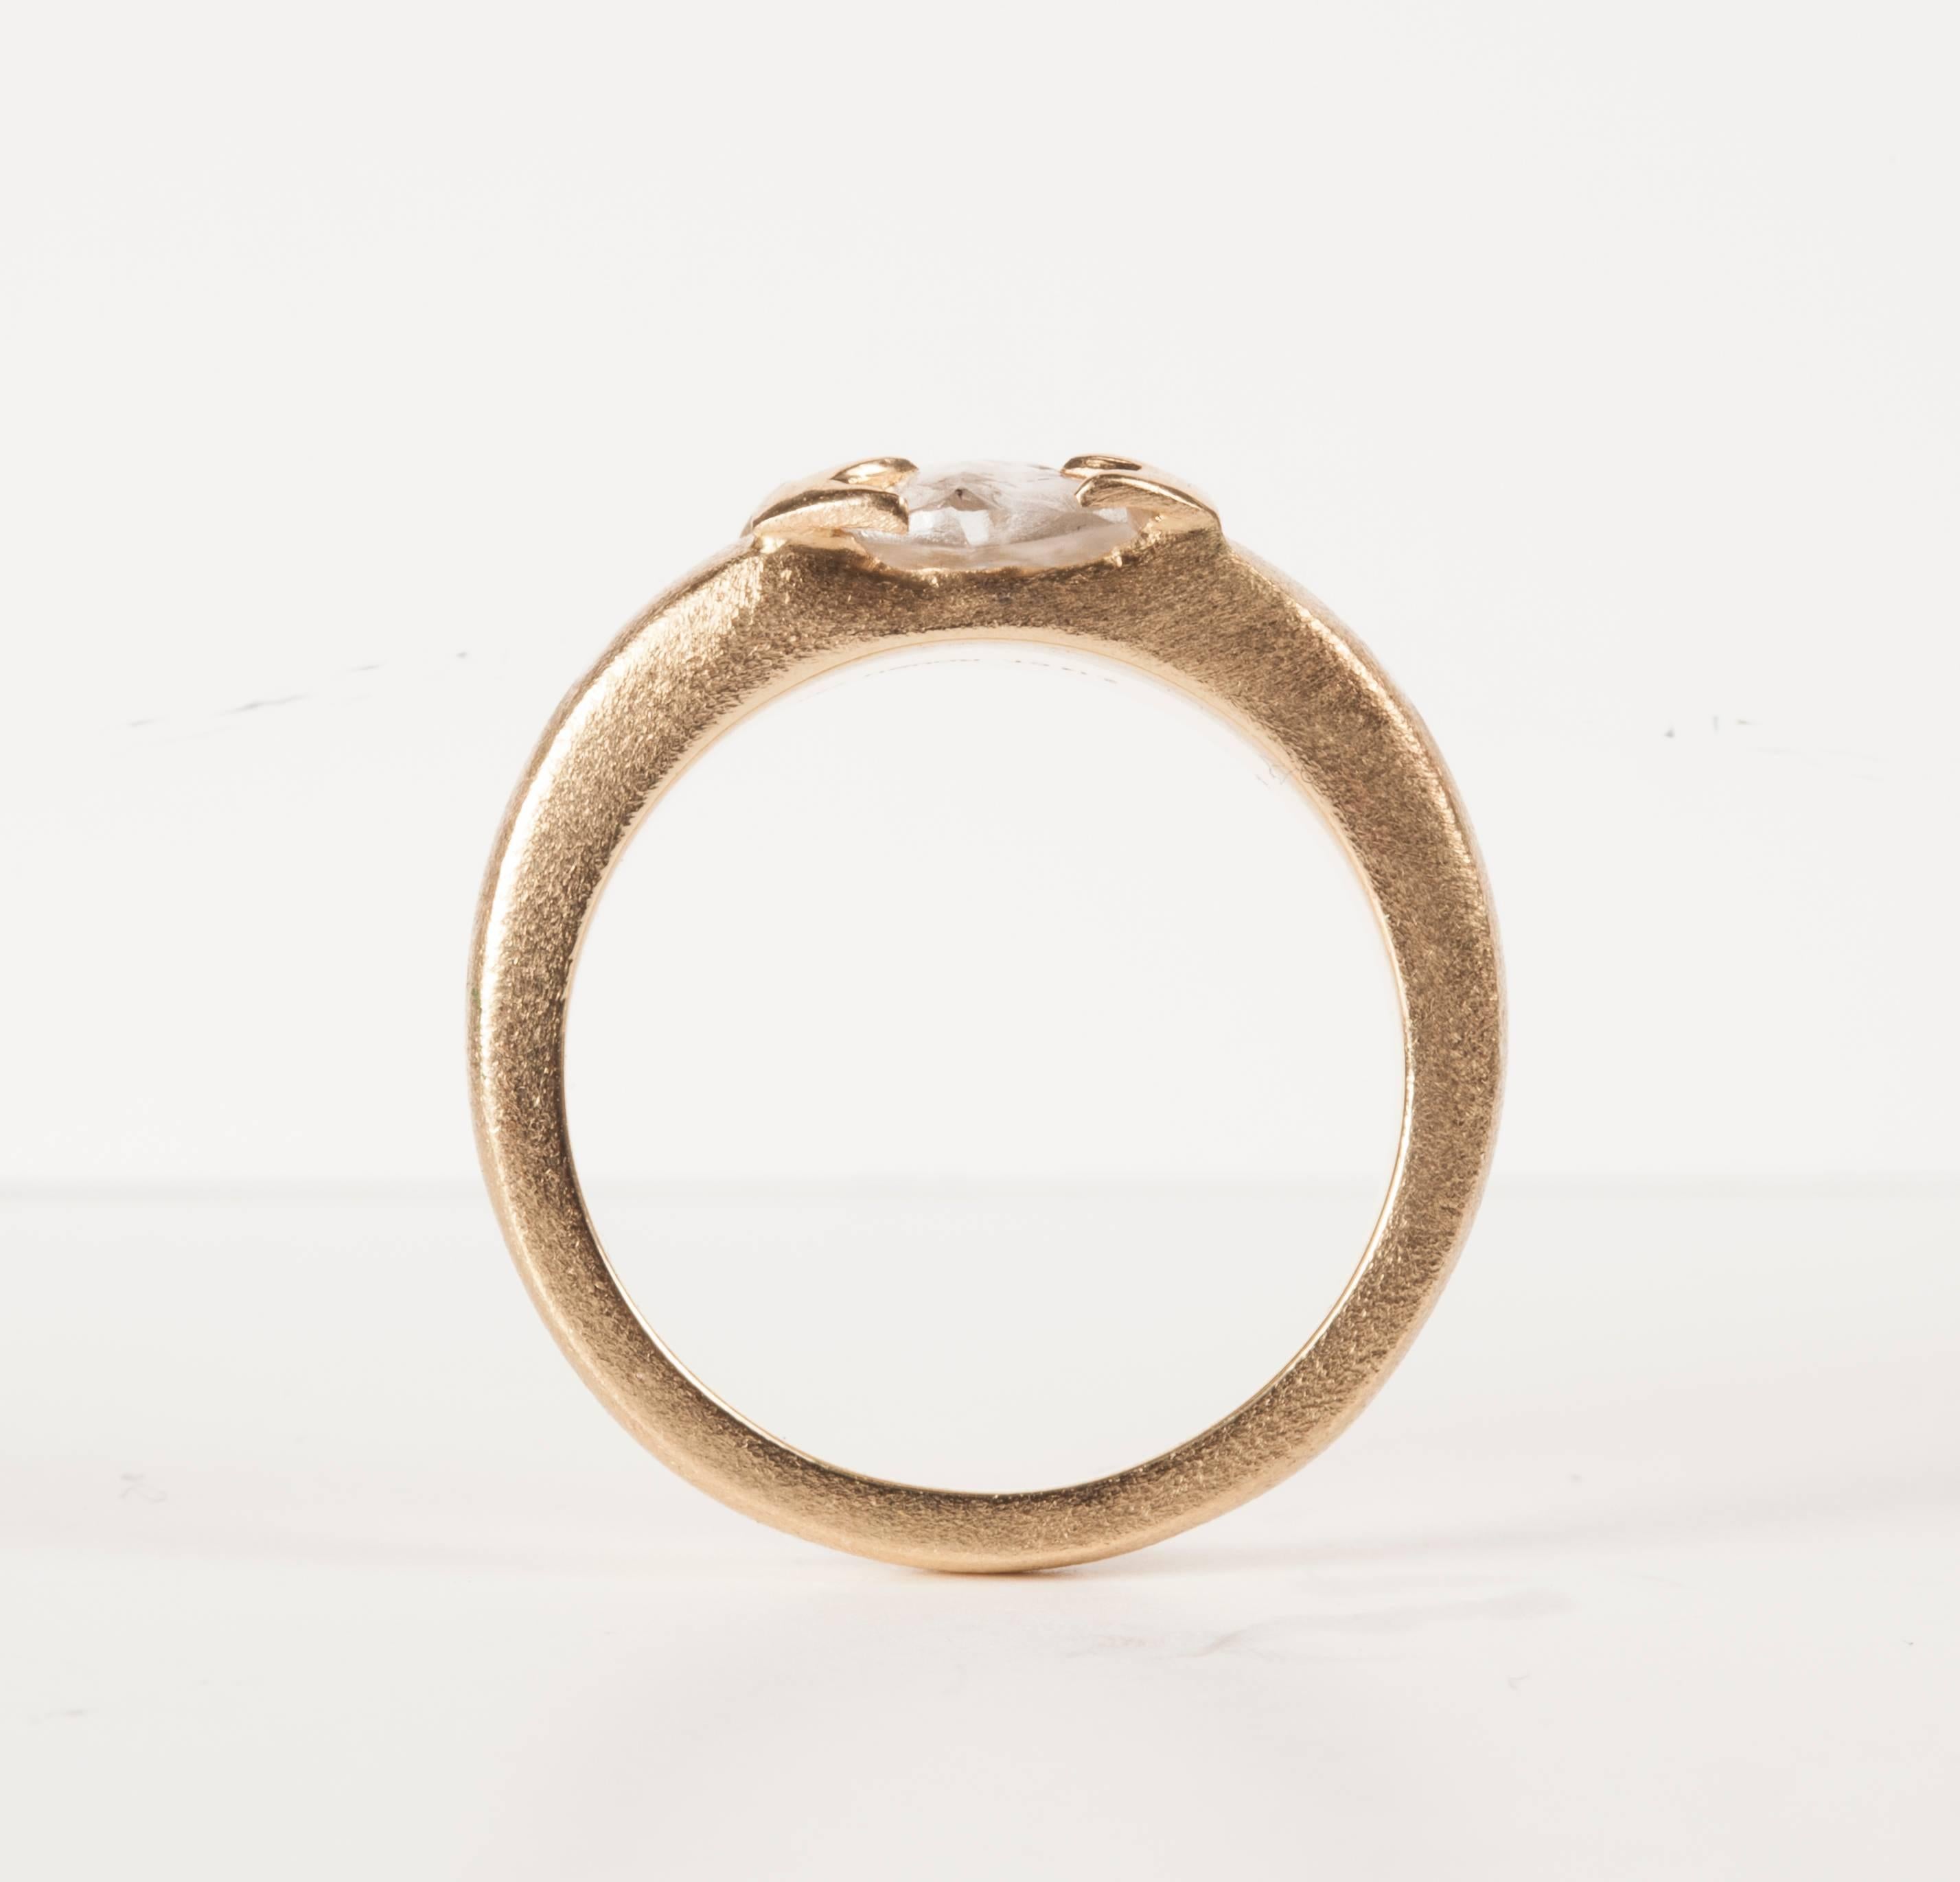 2.14 ct. Natural Whitish Rough diamond in 14K handcrafted gold ring.

Every rough diamond from Roughdiamonds dk has been personally handpicked by Maya Bjørnsten. The diamonds we reject are sent back to be cut into regular diamonds. All the diamonds